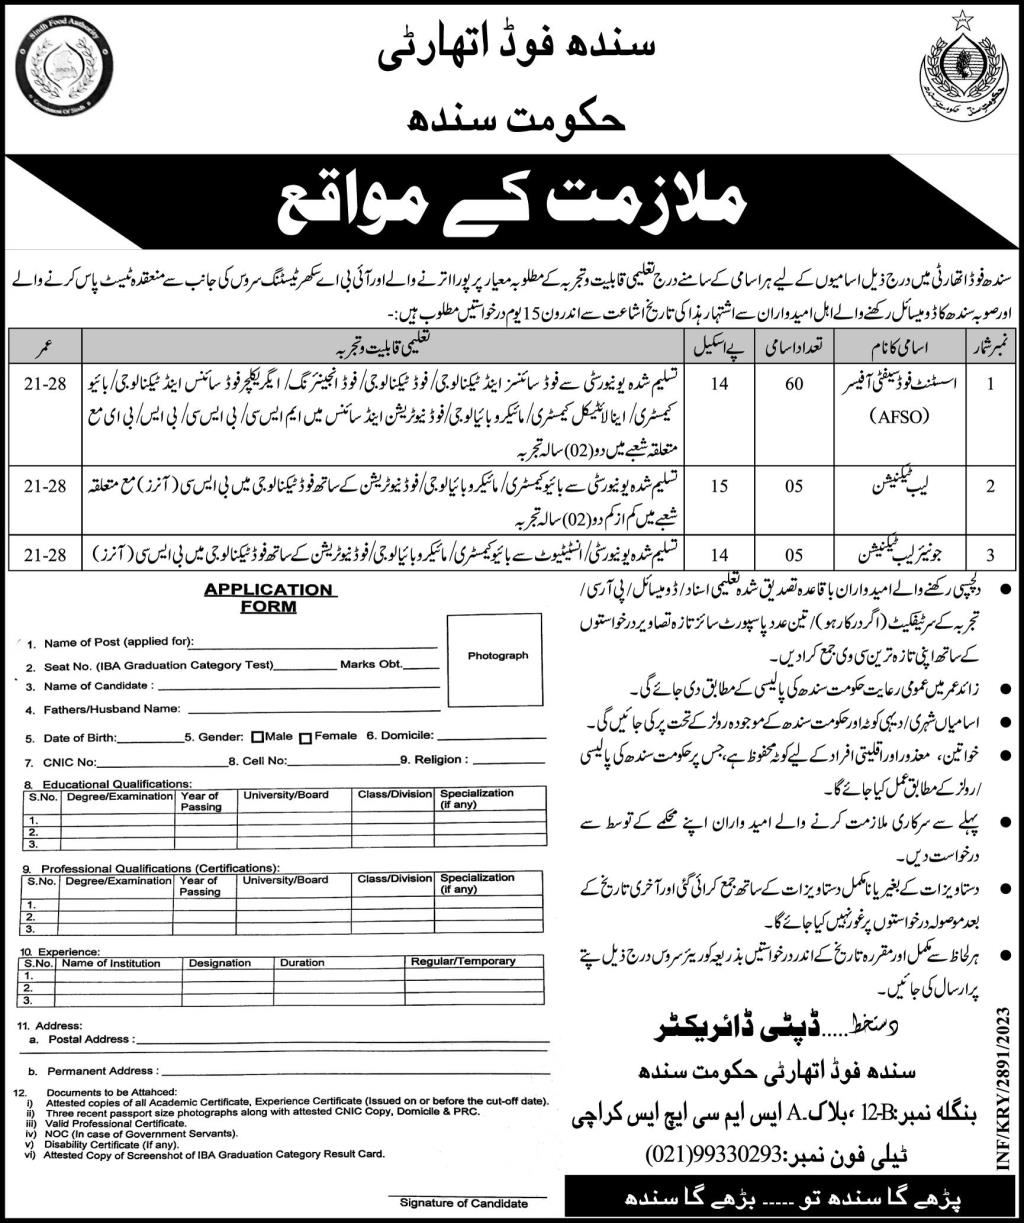 Sindh Food AuthorityGovernment Jobs in Pakistan Today – Sindh Food Authority SFA Jobs 2023 Jobs 2023 SFA (70+ Seats)